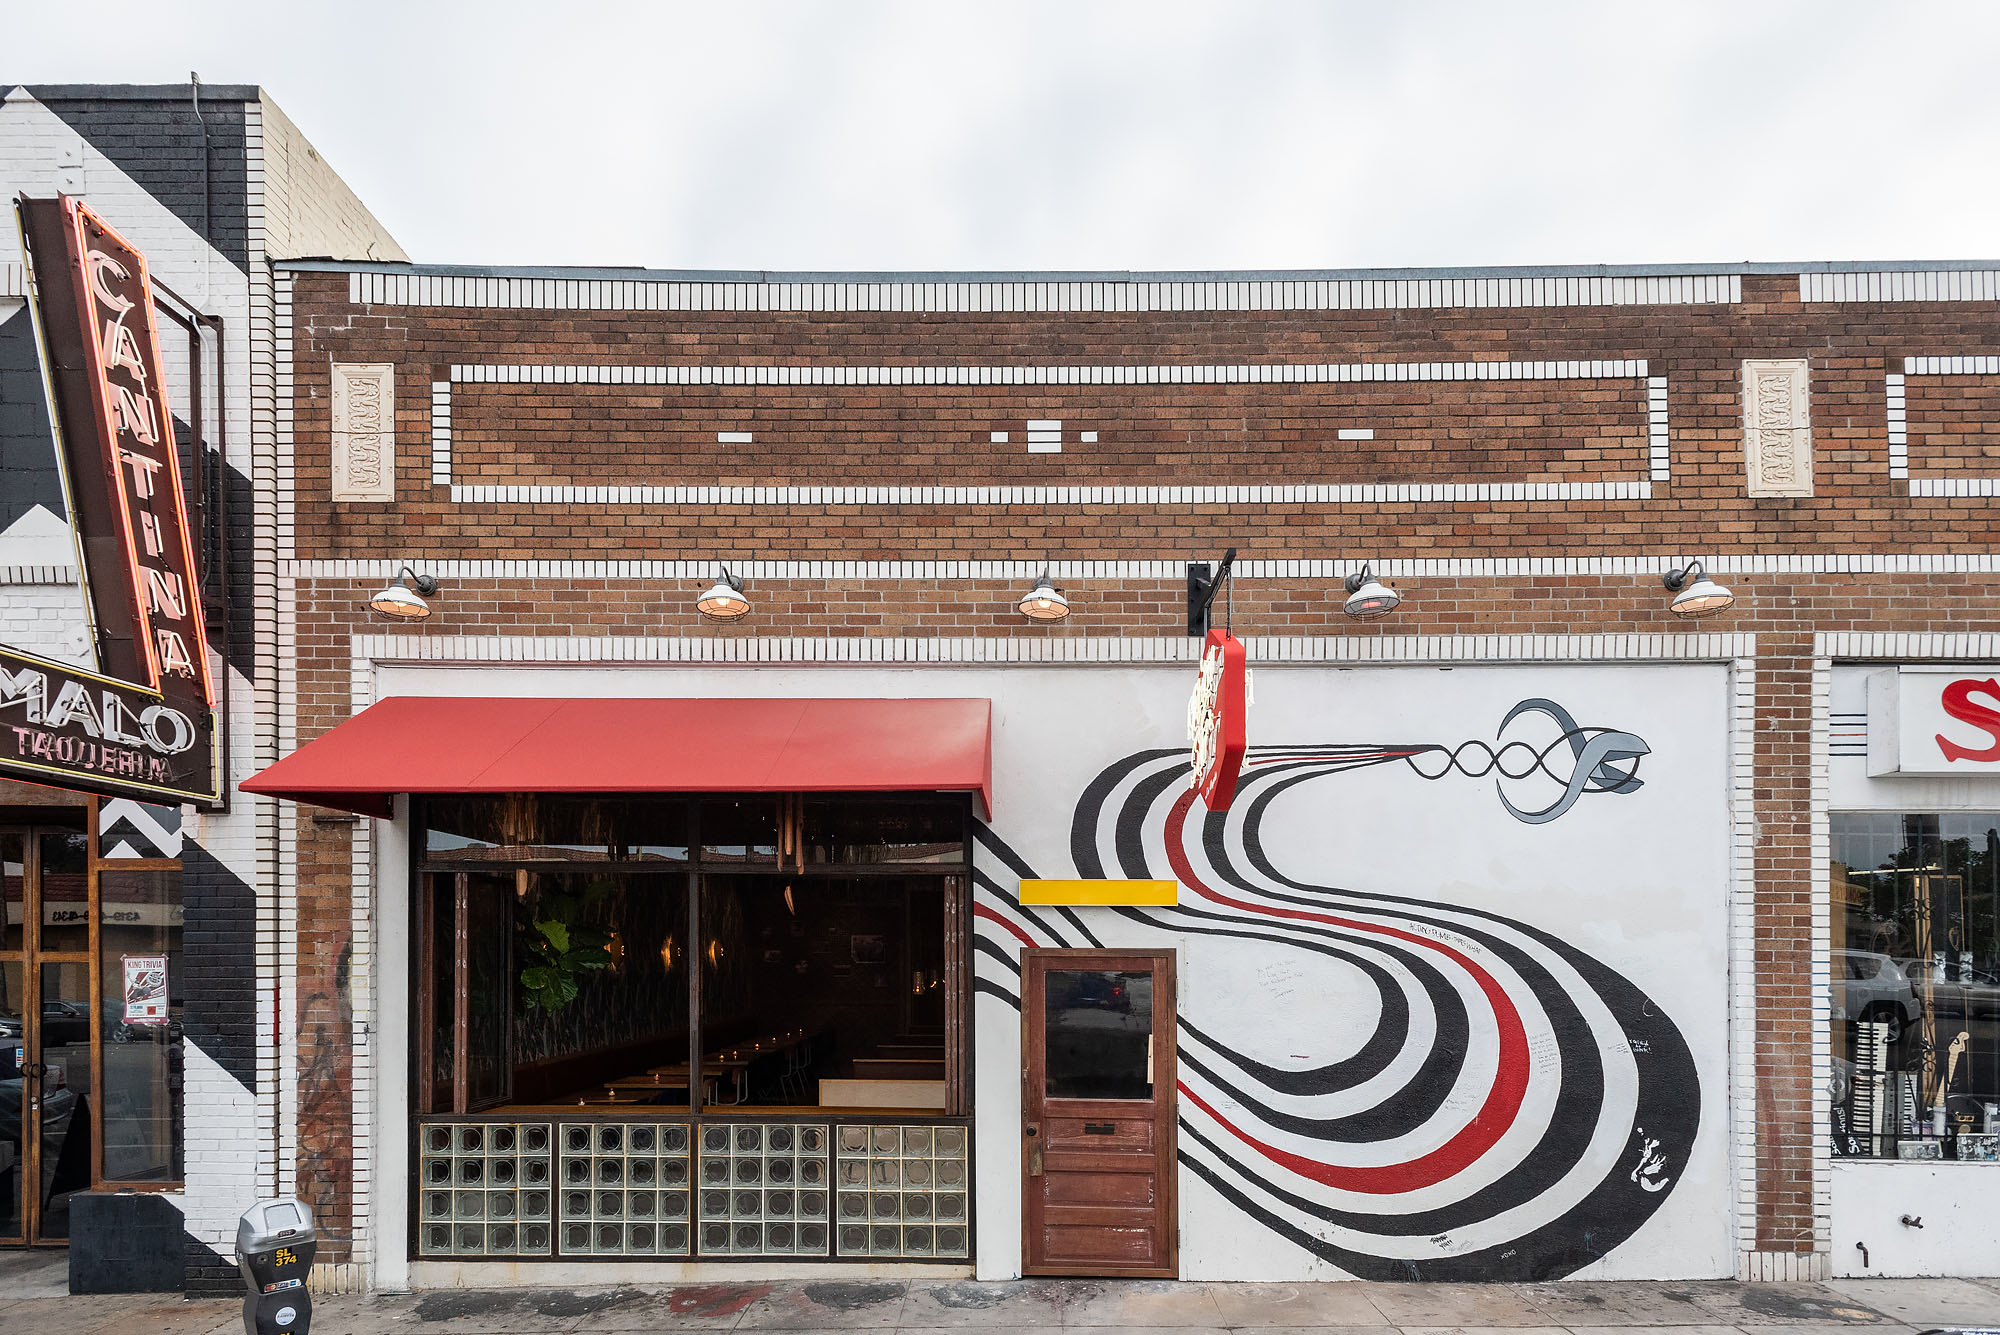 A red awning and white mural on a brick building during a cloudy day.